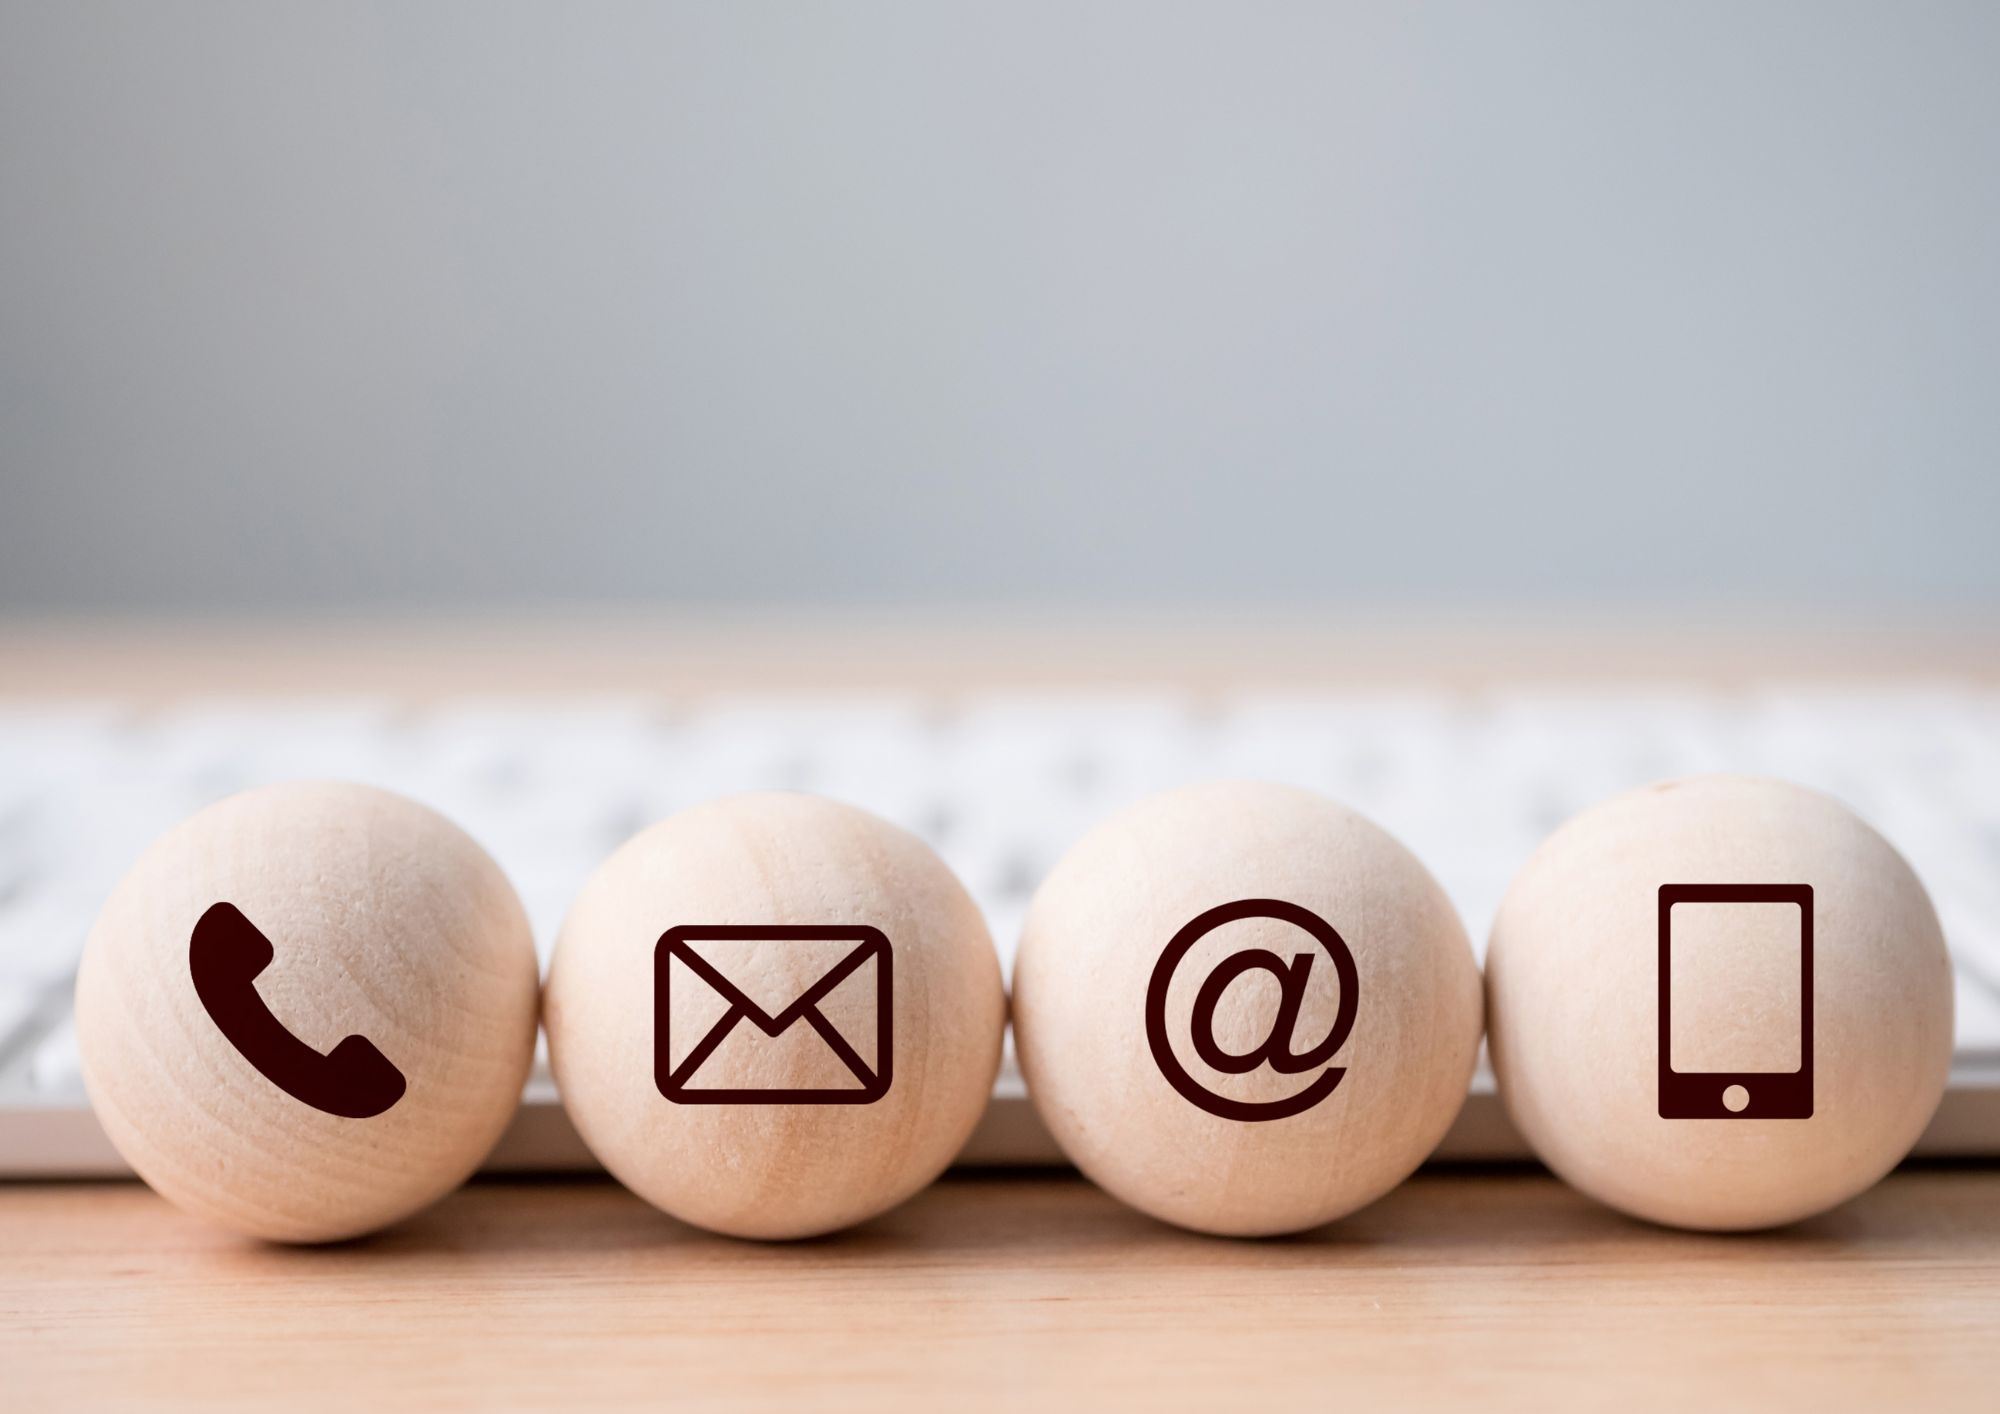 Wooden Balls with a telephone, letter, @ symbol, and cellphone